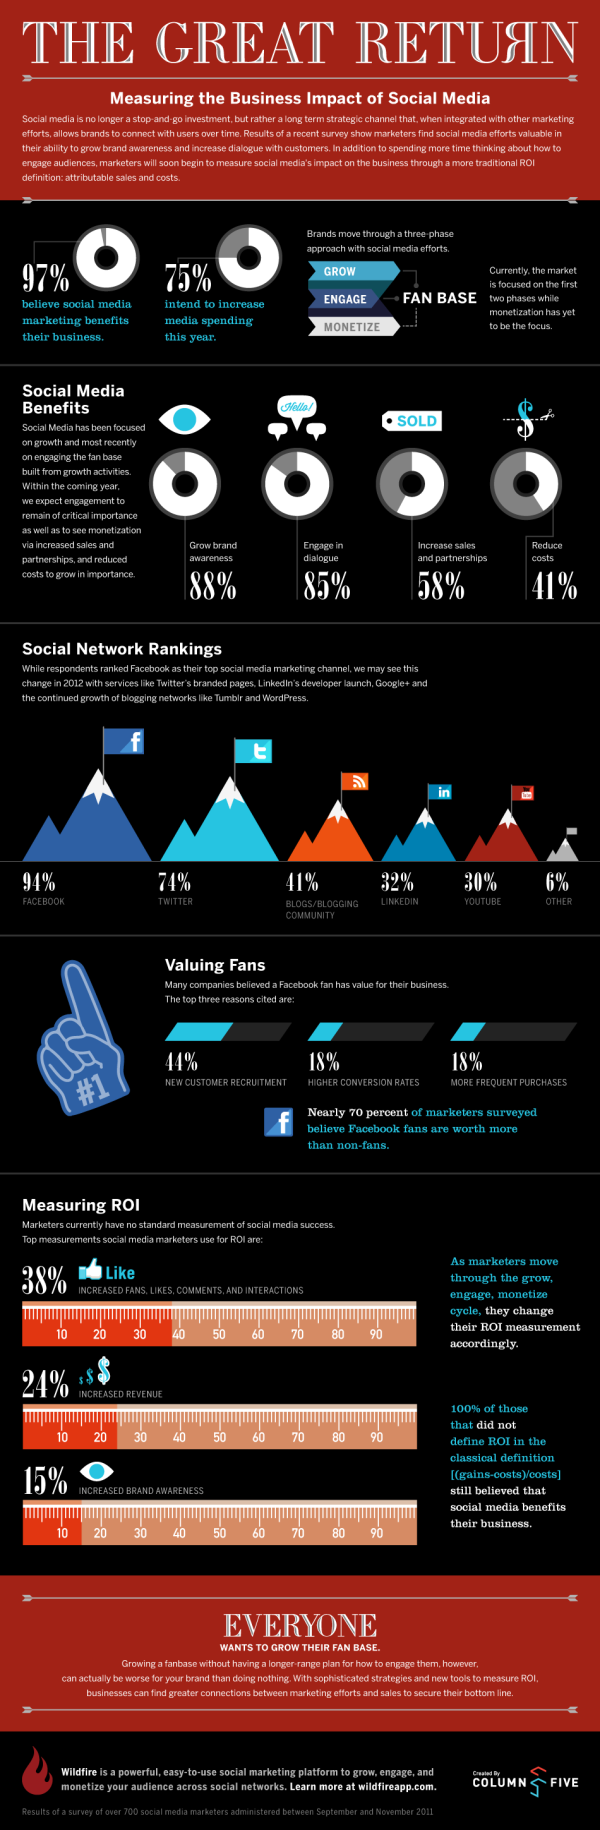 Measuring the Business Impact of Social Media resized 600